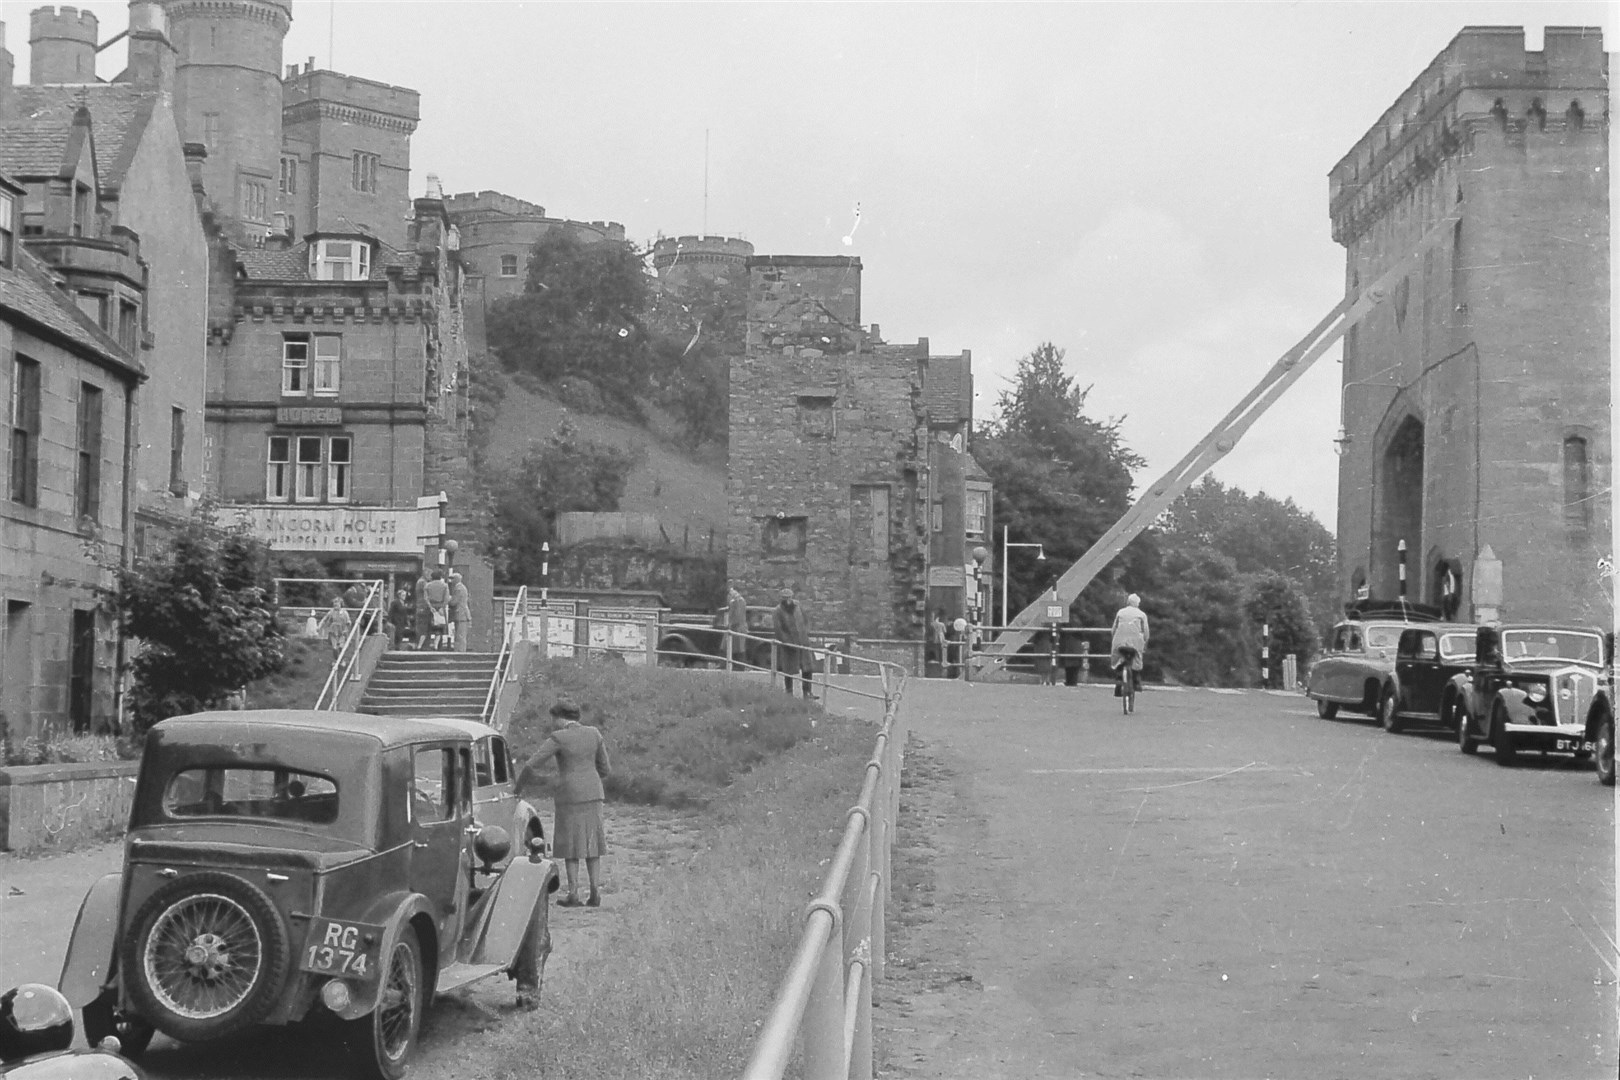 The bottom of Bridge Street in the early 1960s when the demolition of the old bridge had begun but the tower remained in place.